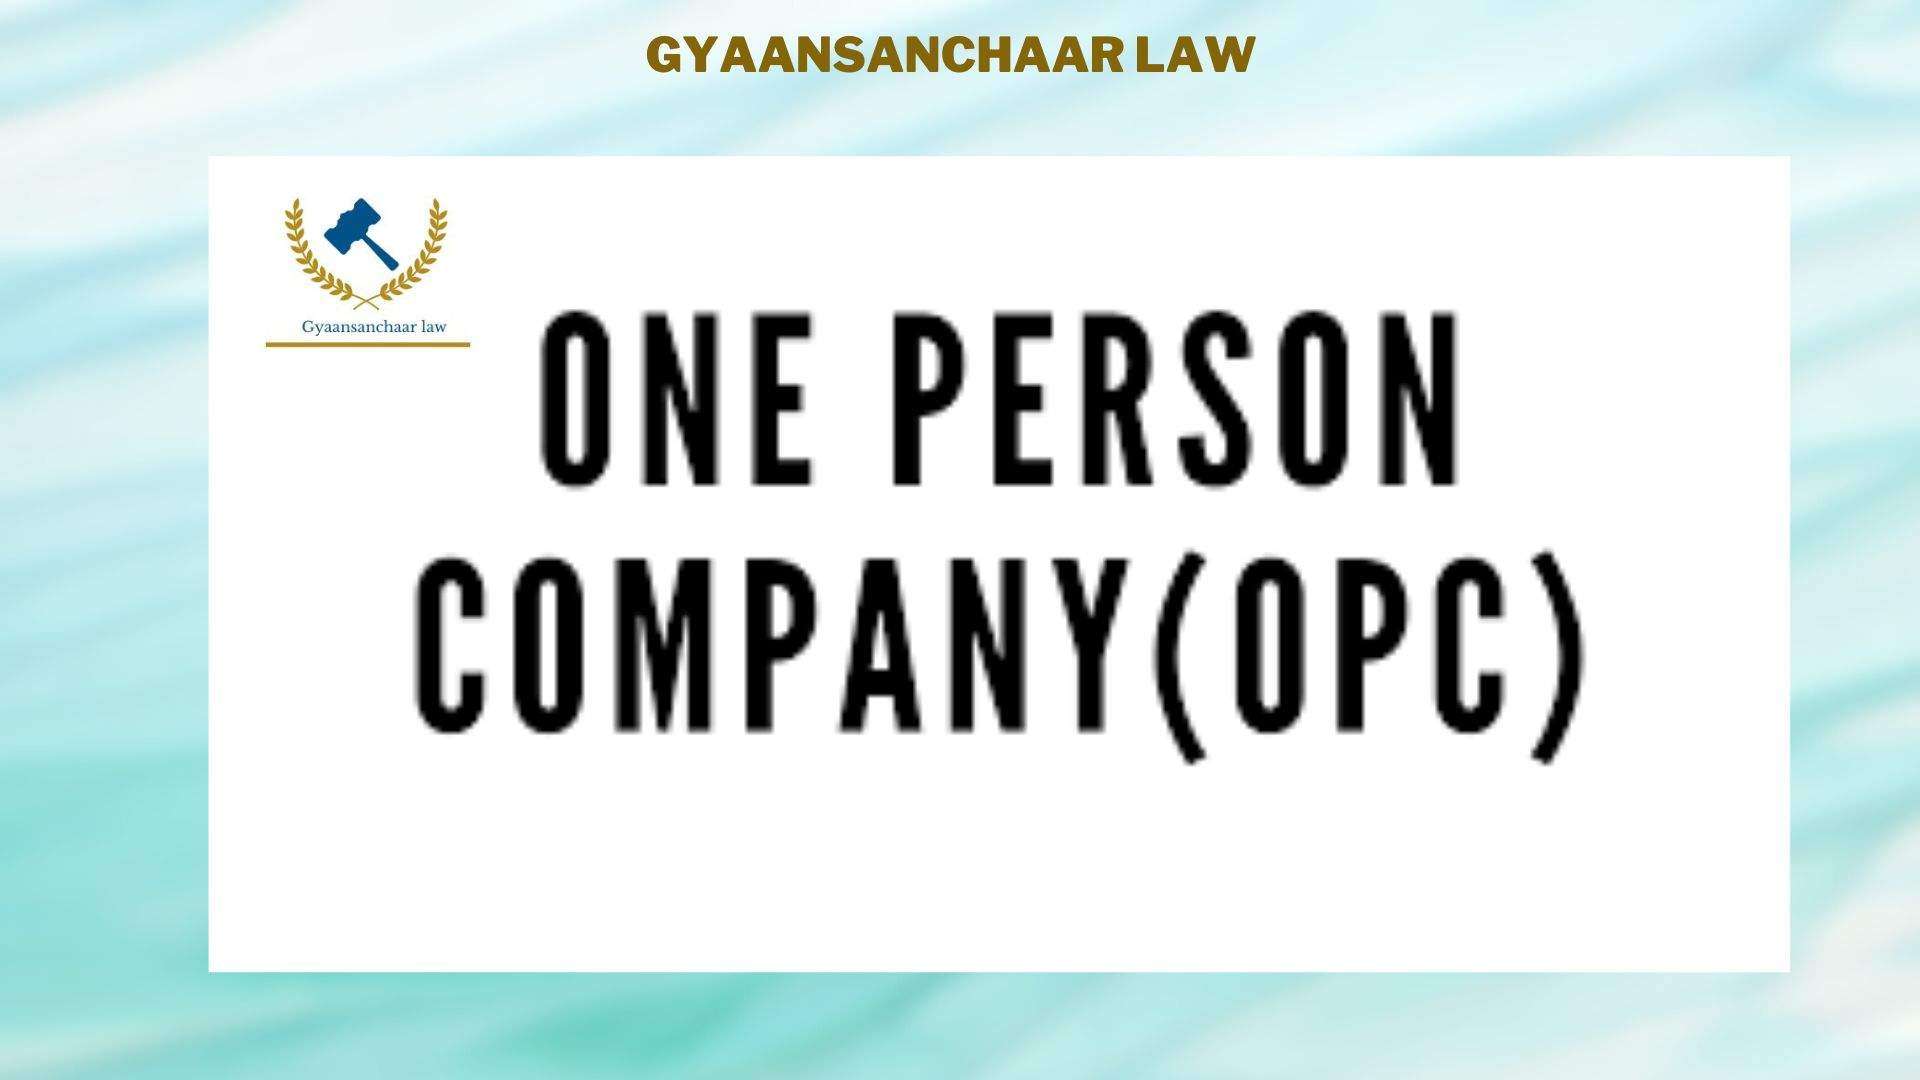 Incorporation of one person company